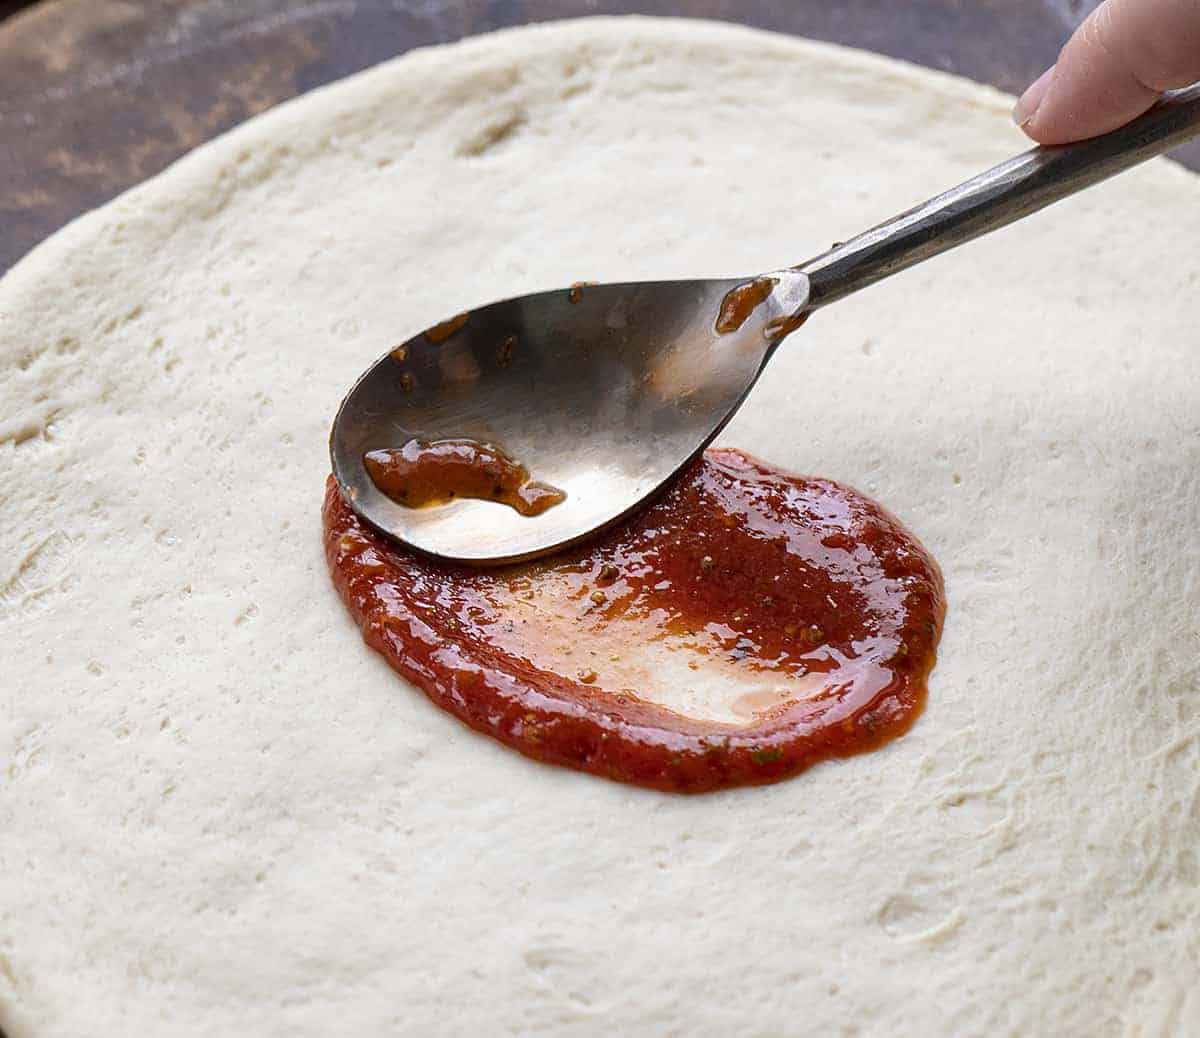 Spreading Pizza Sauce on a Raw Pizza Crust